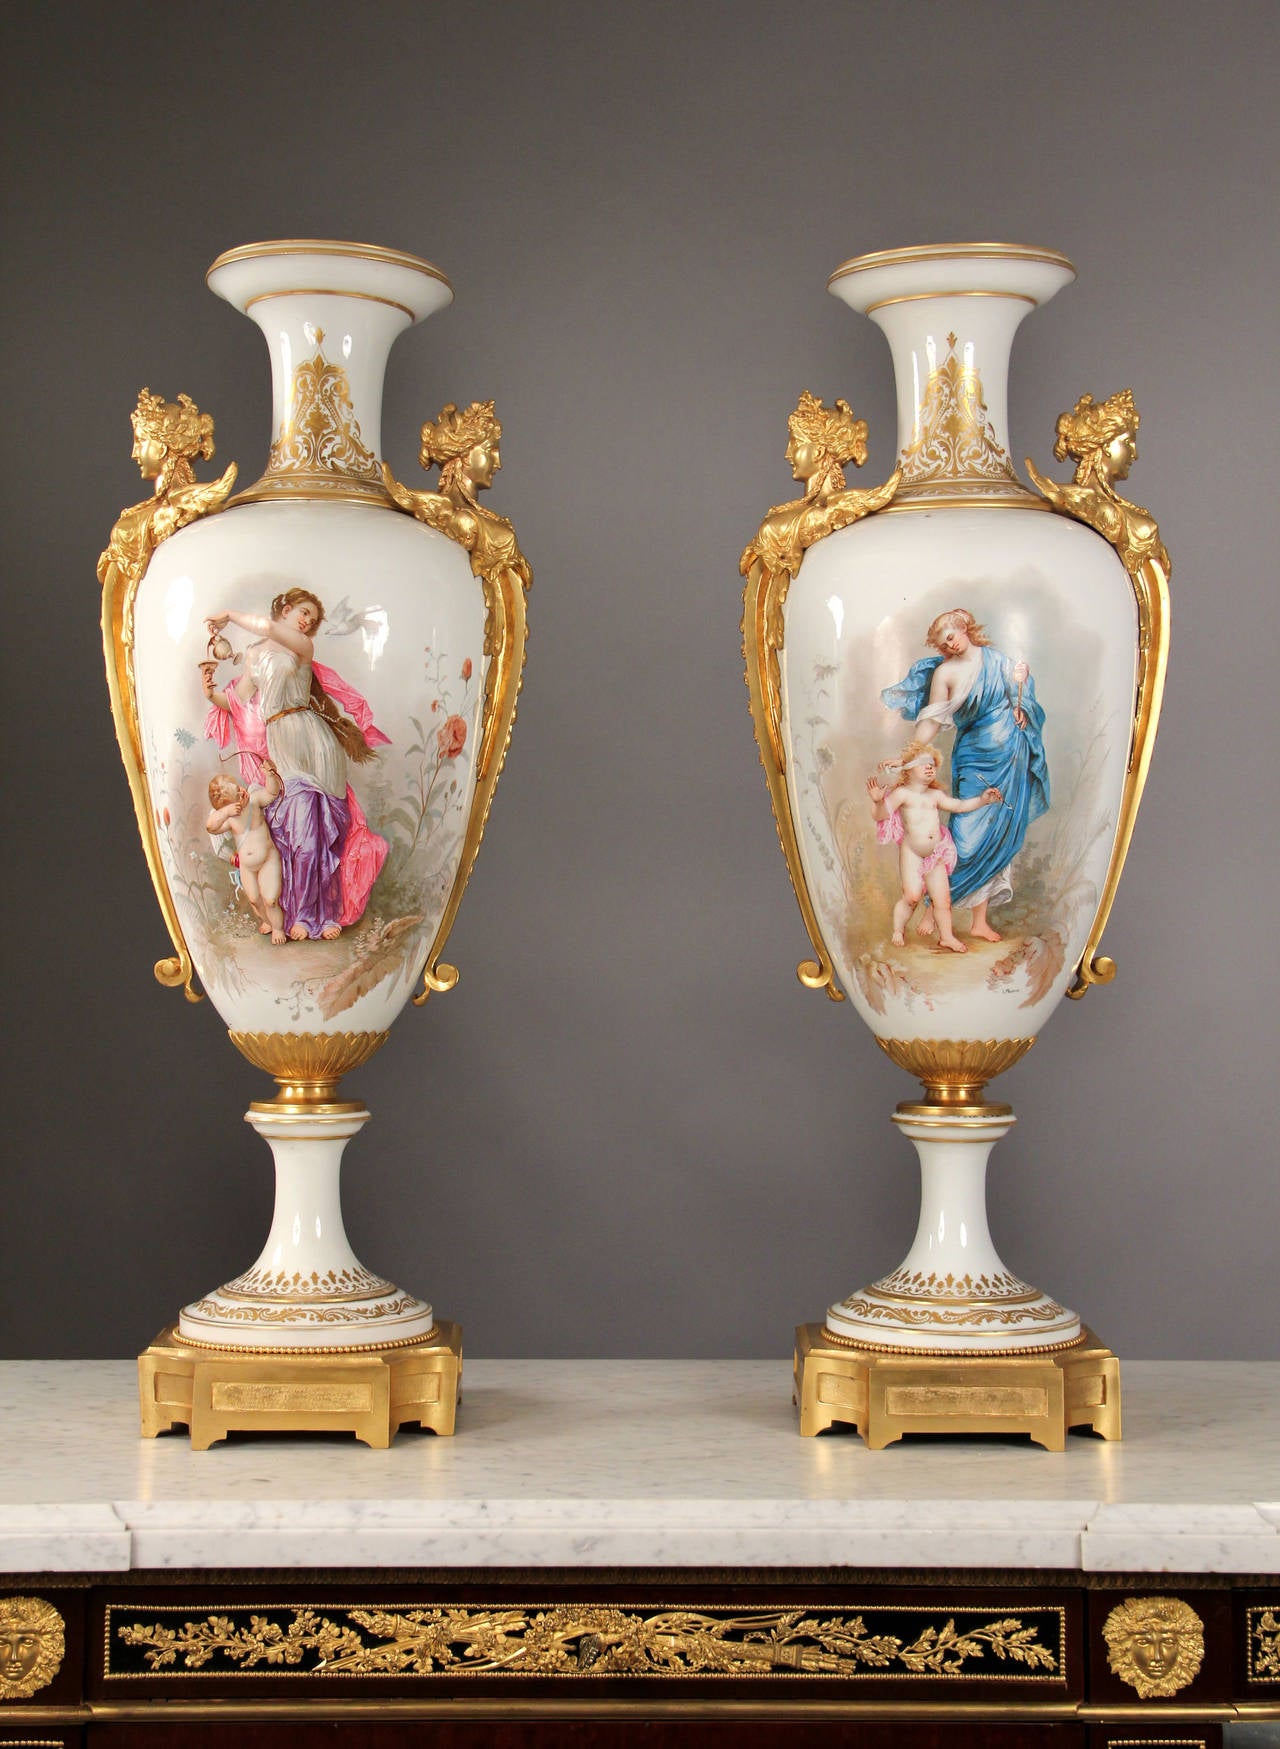 A Very Rare Pair of Late 19th Century Gilt Bronze Mounted White Sèvres Style Vase

Signed L. Malpass.

Each of baluster form, one with a scene of a maiden pouring wine, with cupid on one side and a dove on the other, the second vase with a scene of